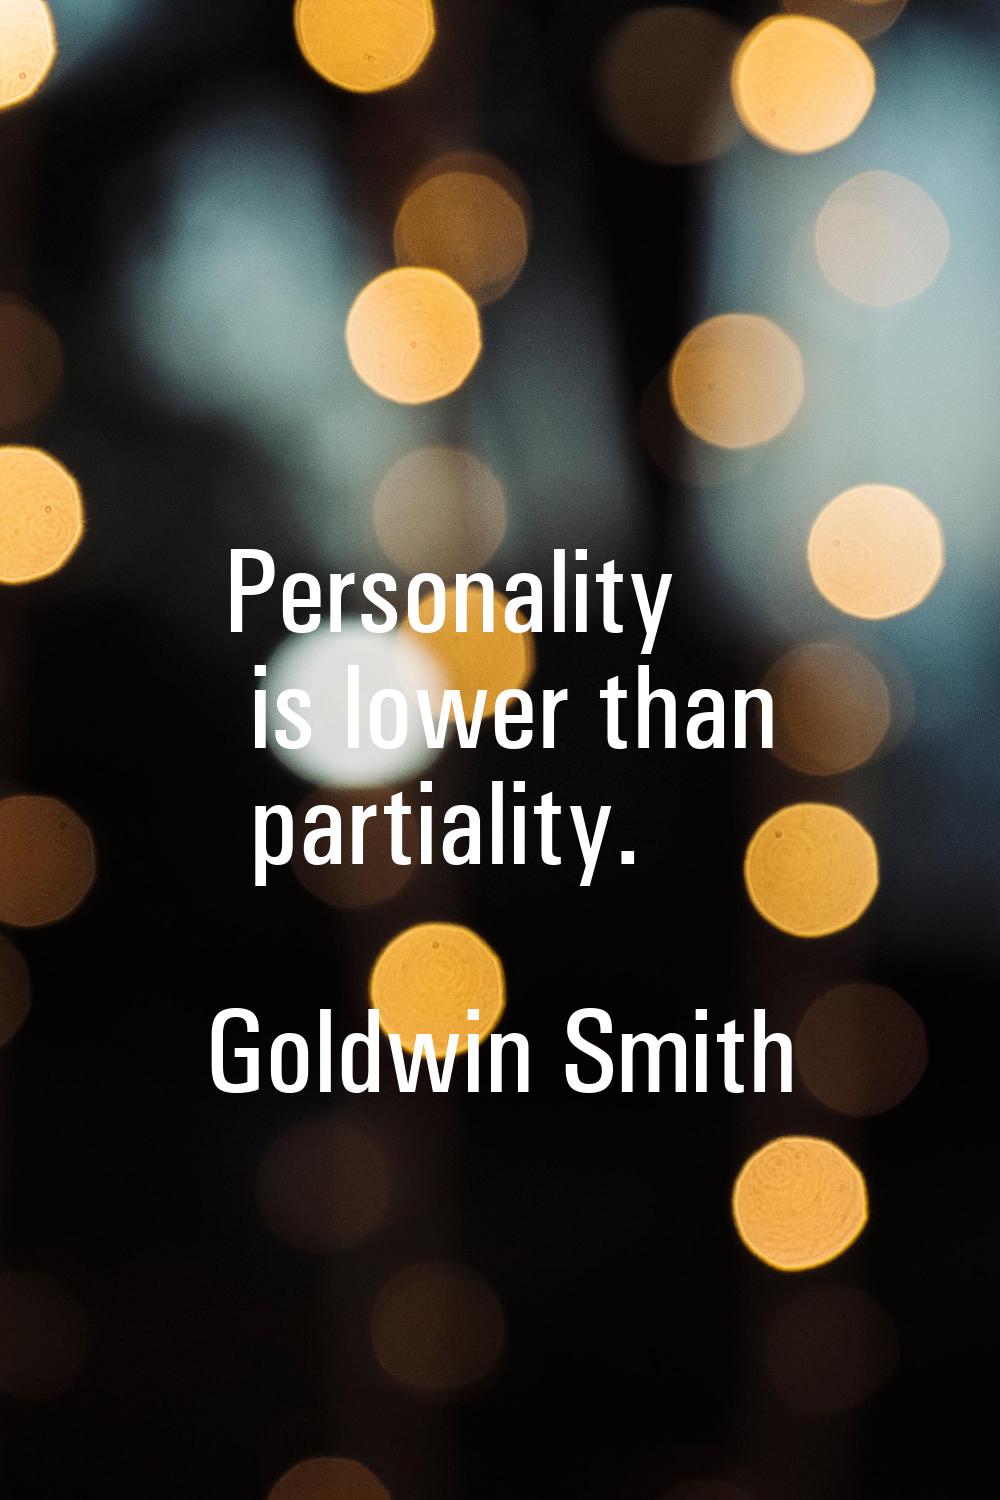 Personality is lower than partiality.